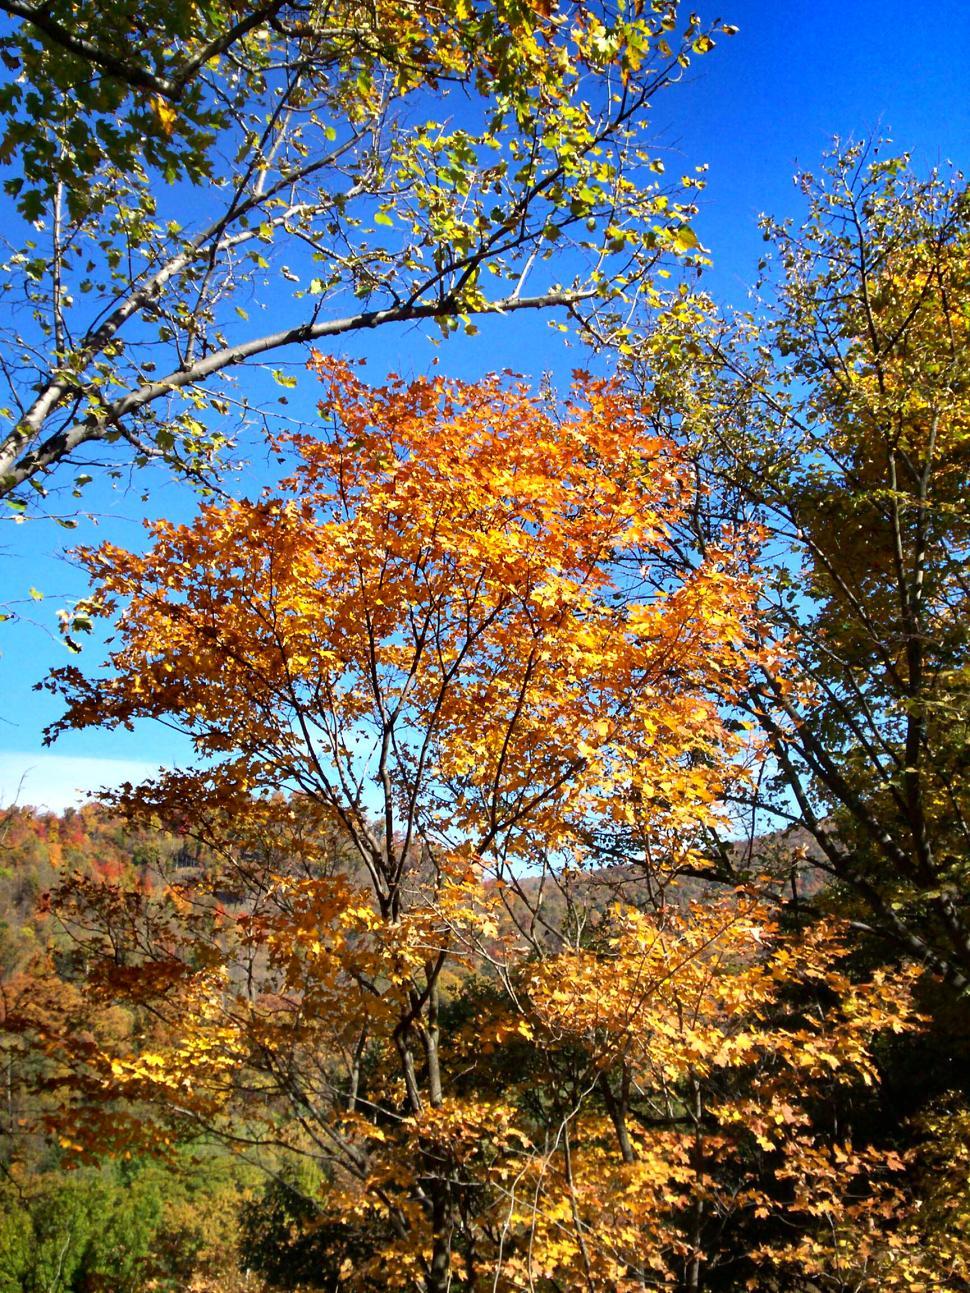 Free Image of Tree With Yellow Leaves in Wooded Area 